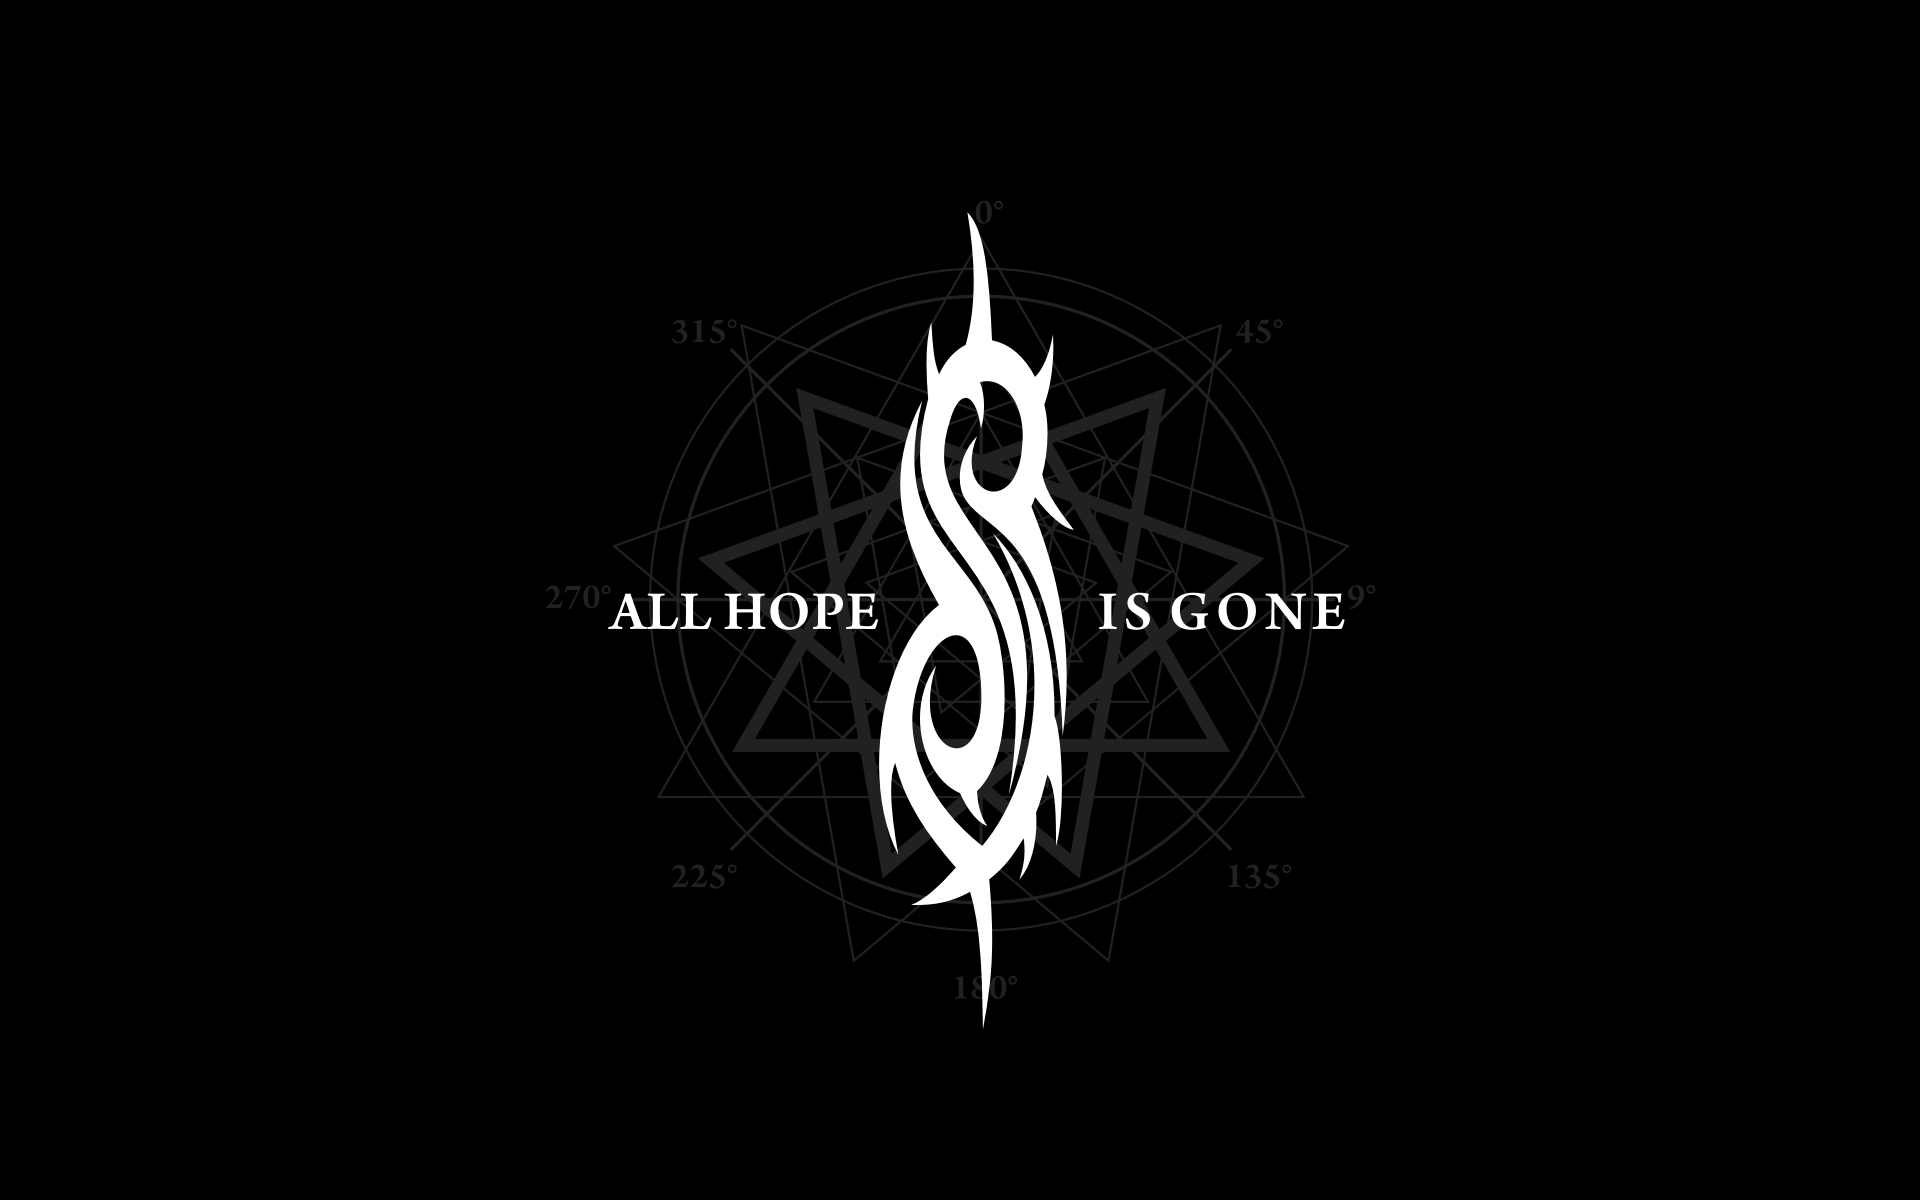 slipknot fondos all hope is gone - 31 270 All Hope Is Gone 22.50 1350 To